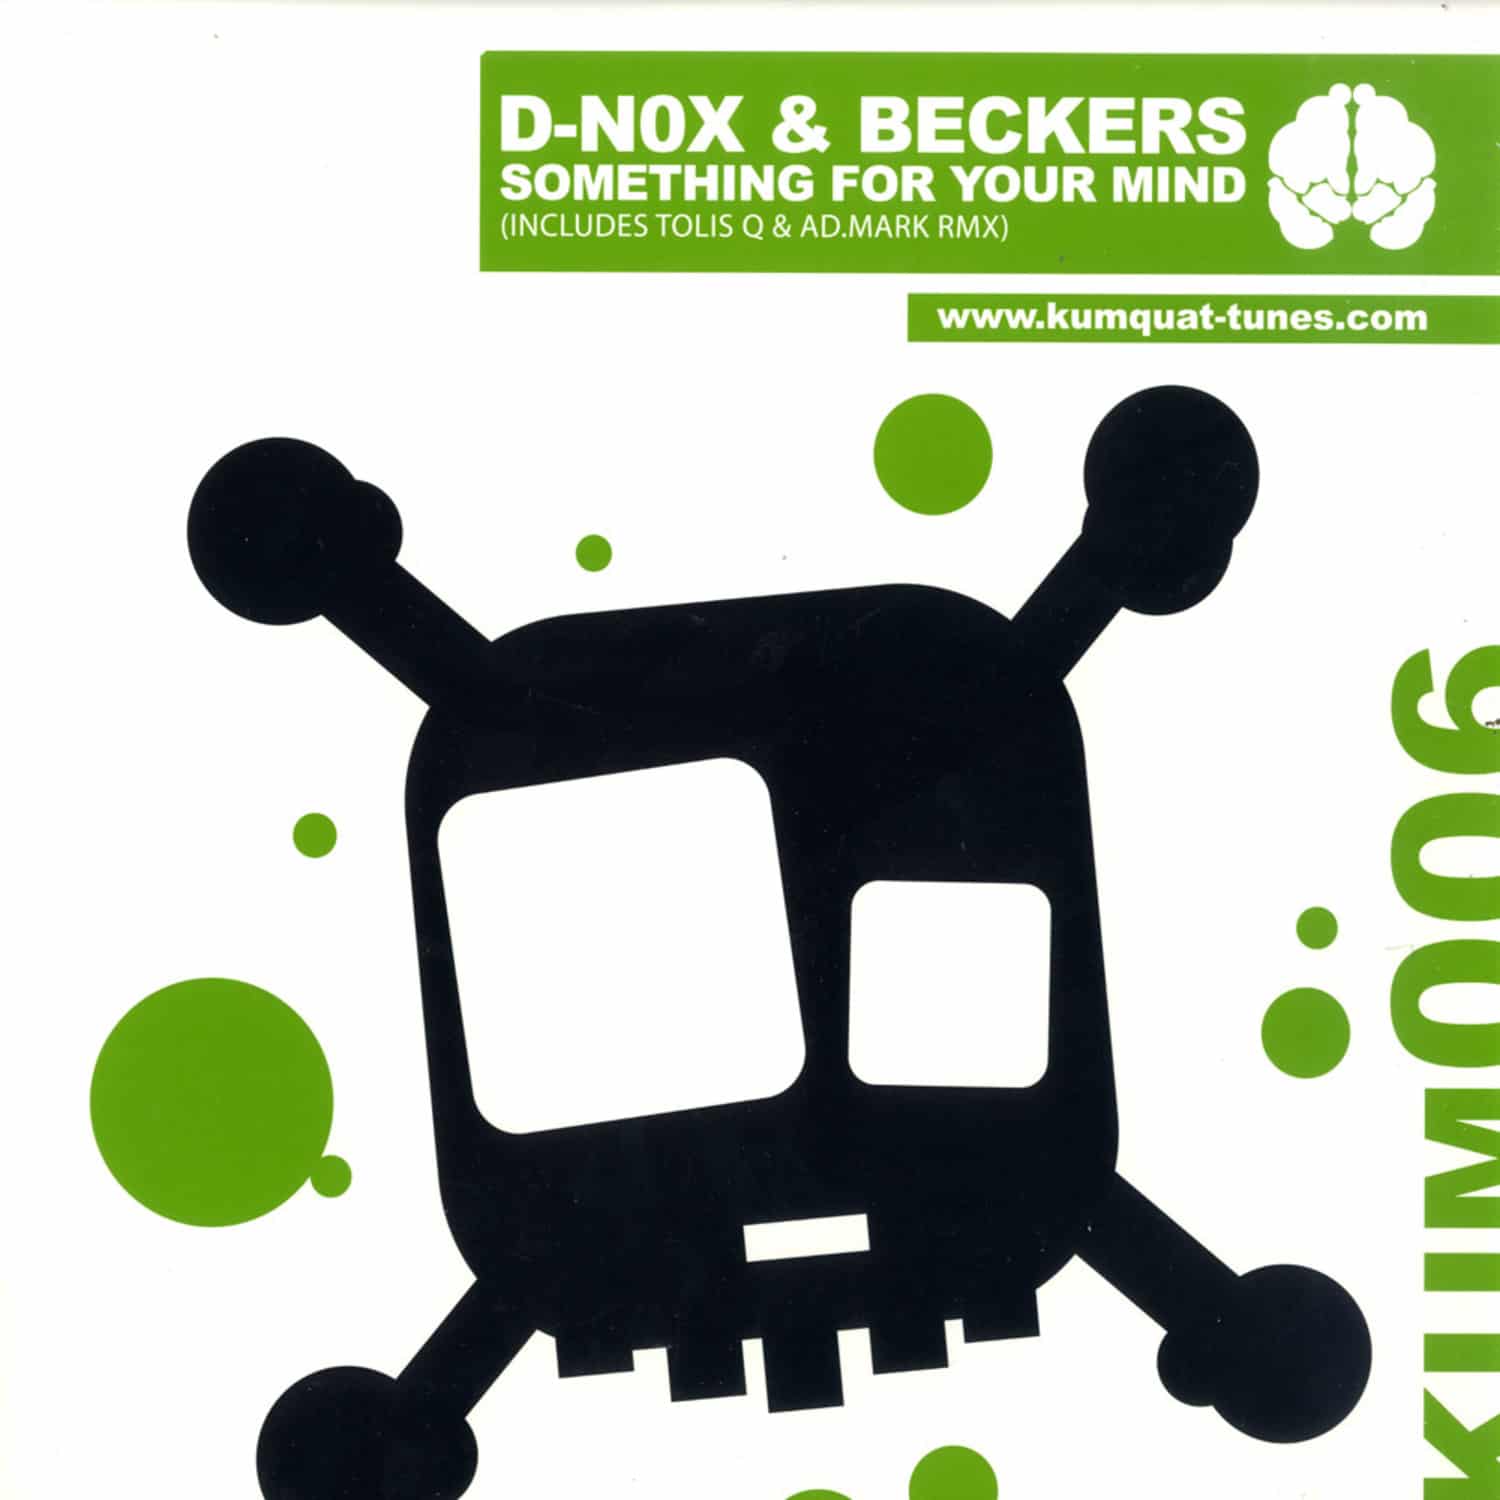 D-Nox & Beckers - SOMETHING FOR YOUR MIND